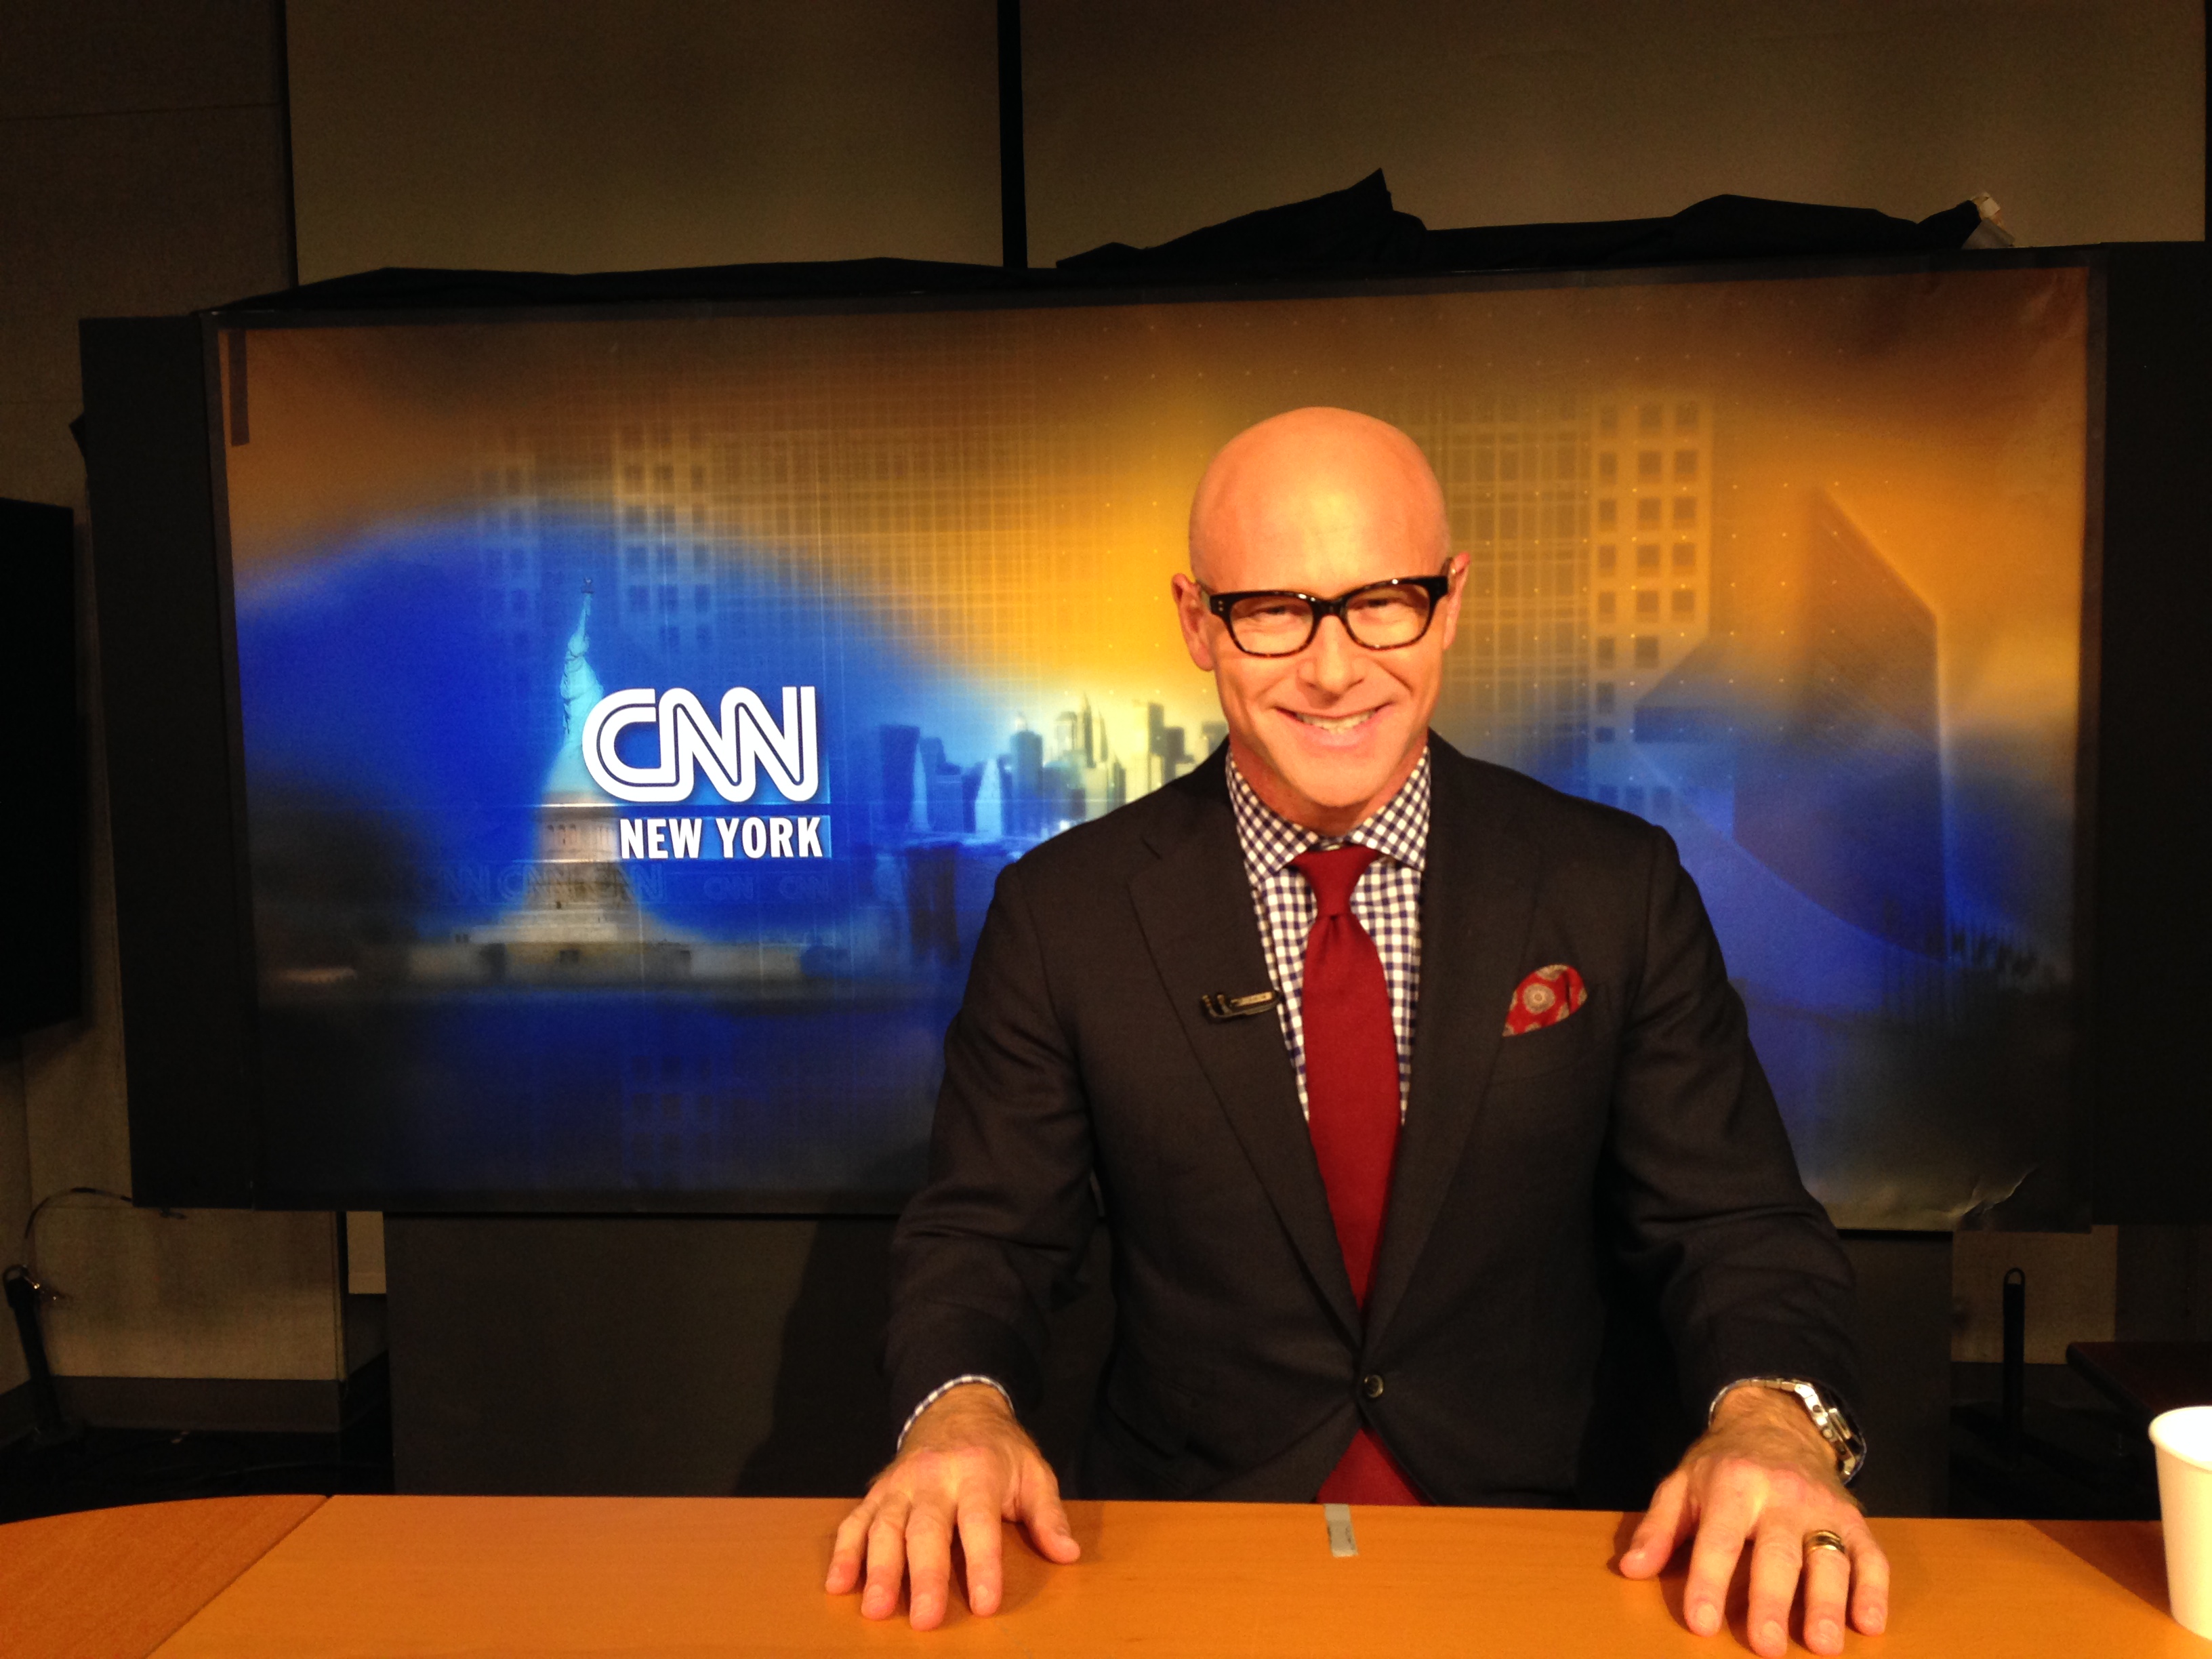 On the set of CNN in New York.